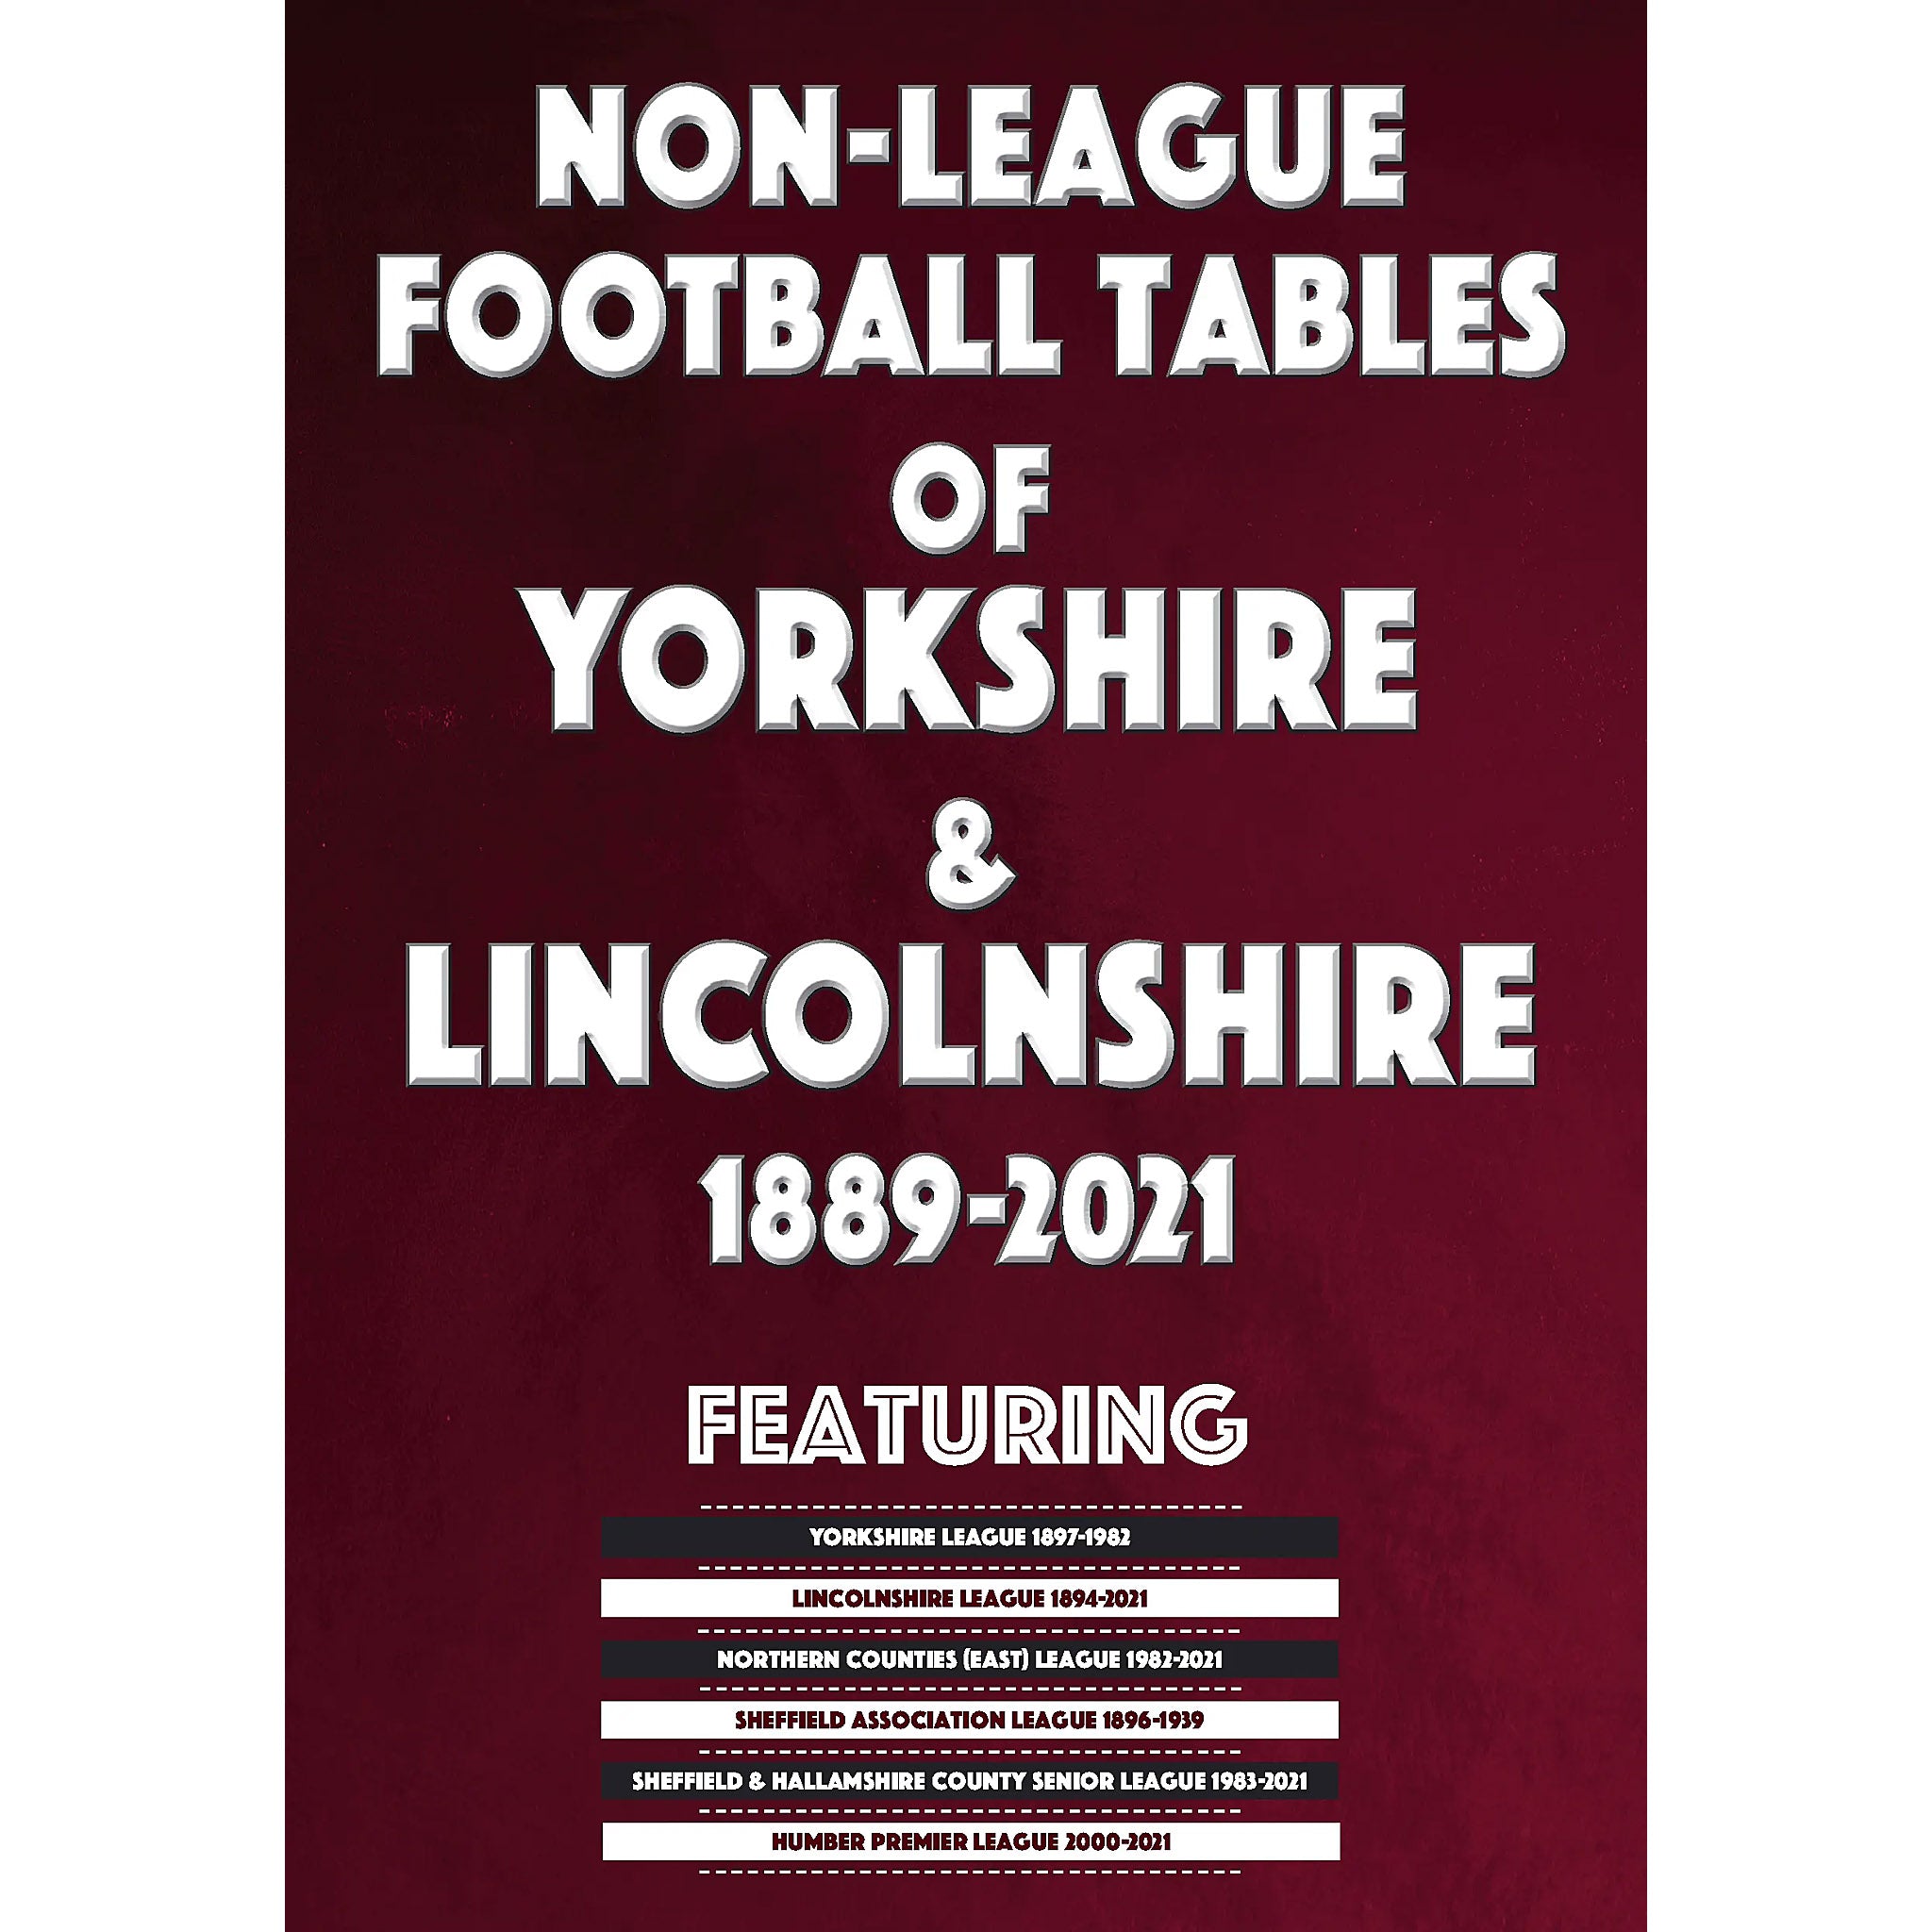 Non-League Football Tables of Yorkshire and Lincolnshire 1889-2021